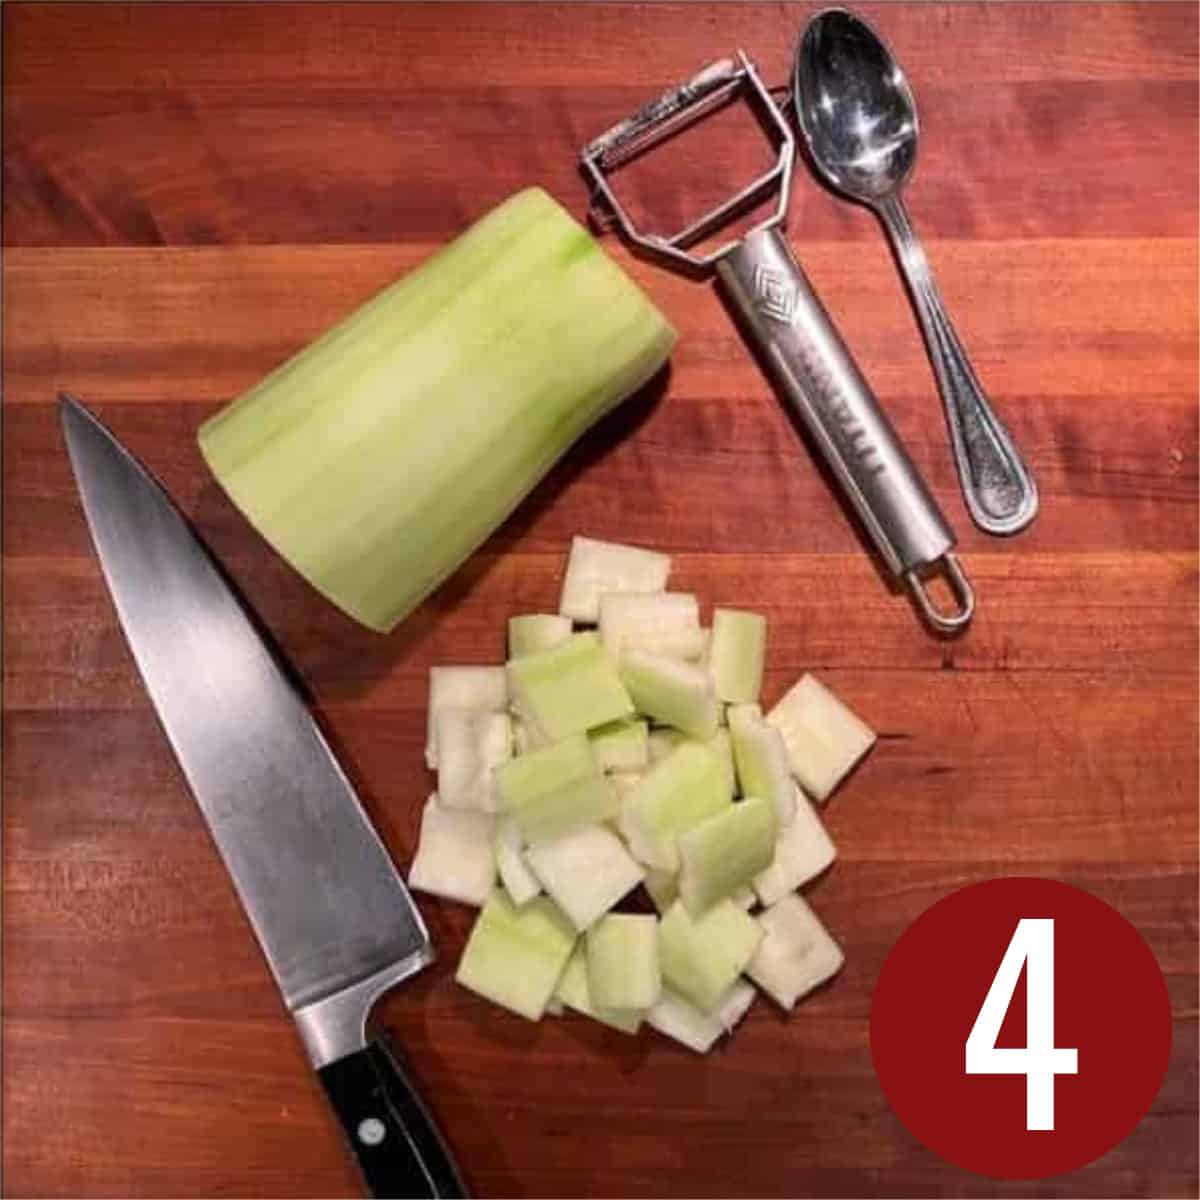 Cut up opo squash on a wooden board with a knife and vegetable peeler next to it.